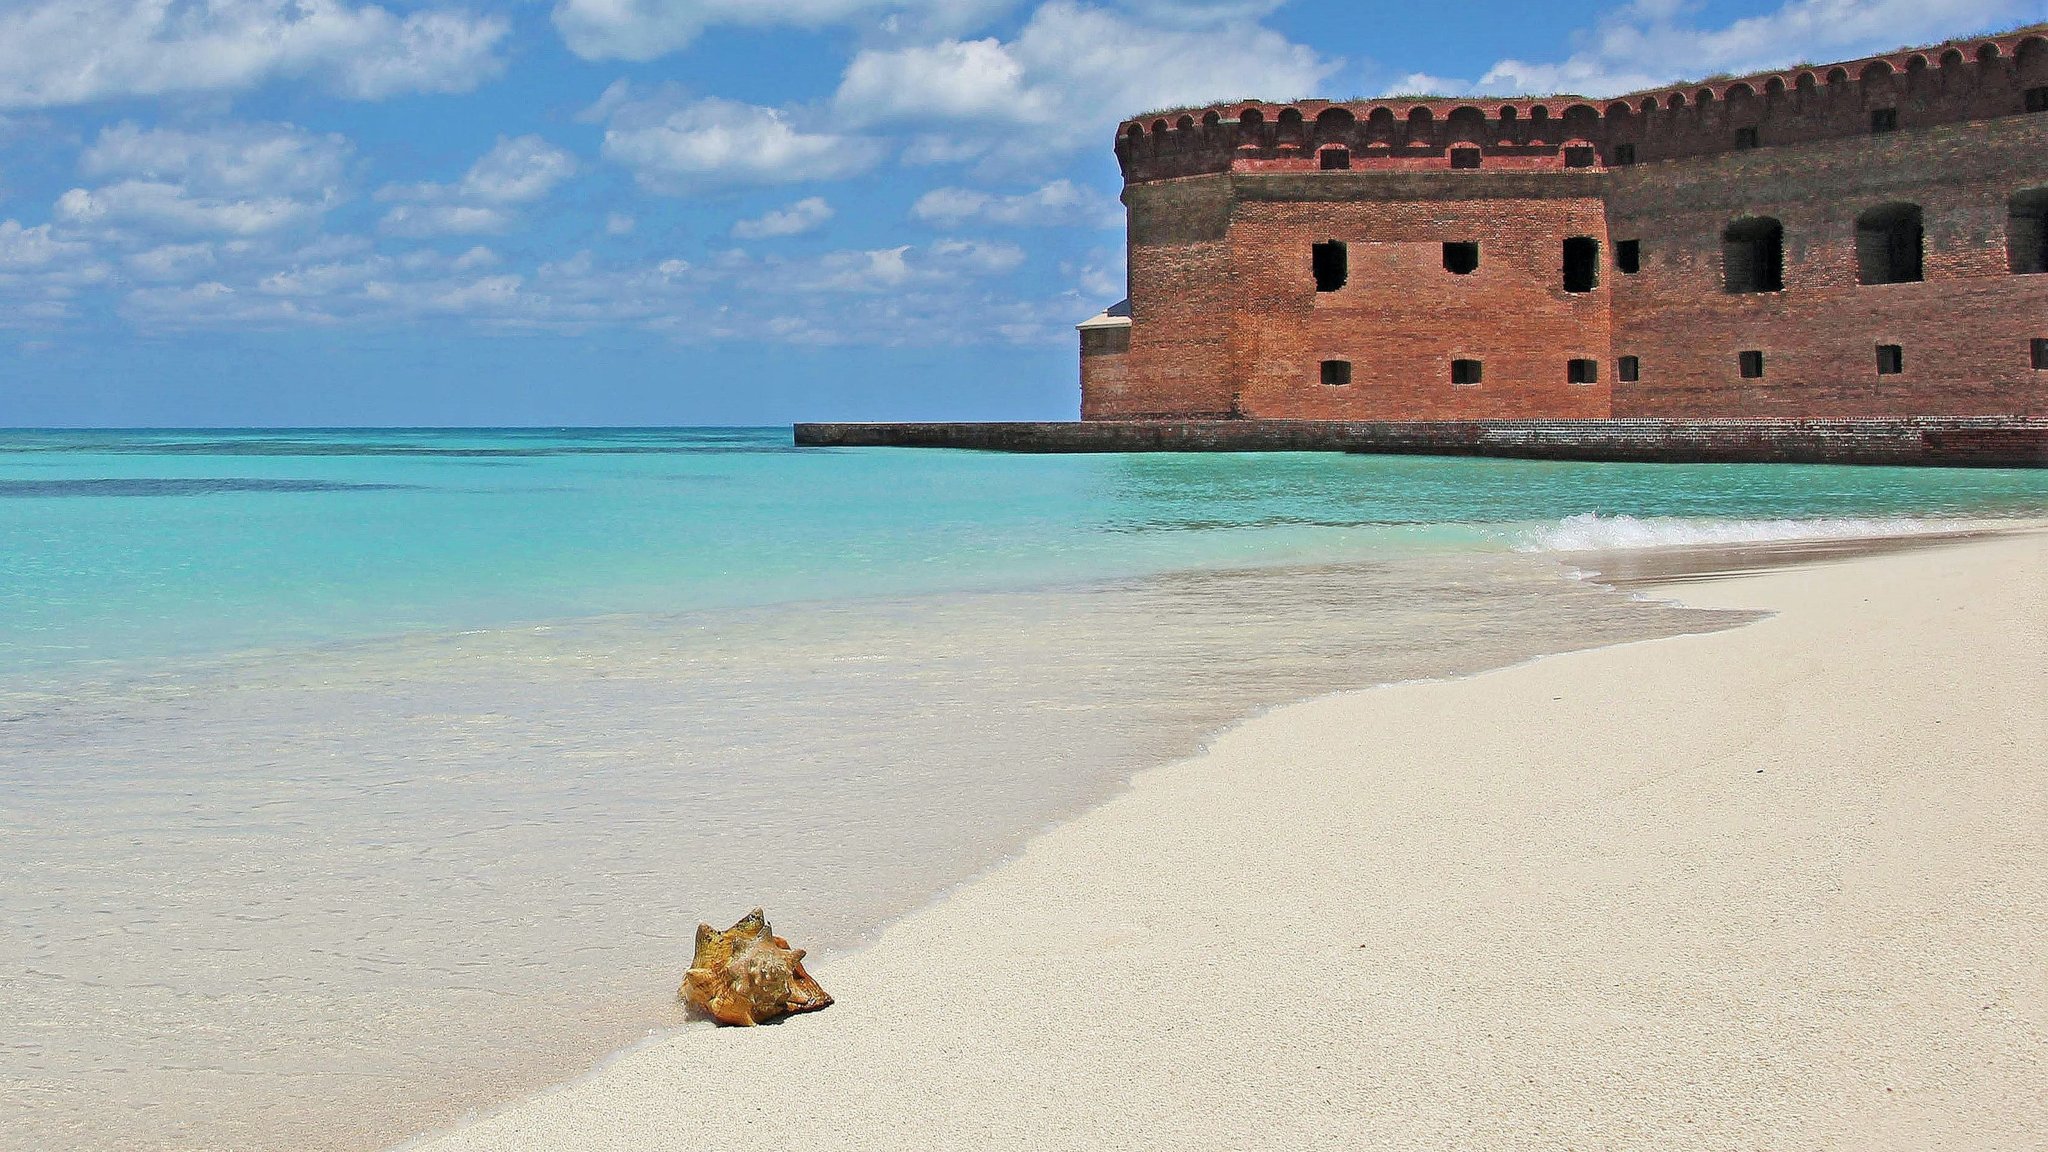 Is Dry Tortugas National Park Worth The Trip? Here's Why We're Saying Yes